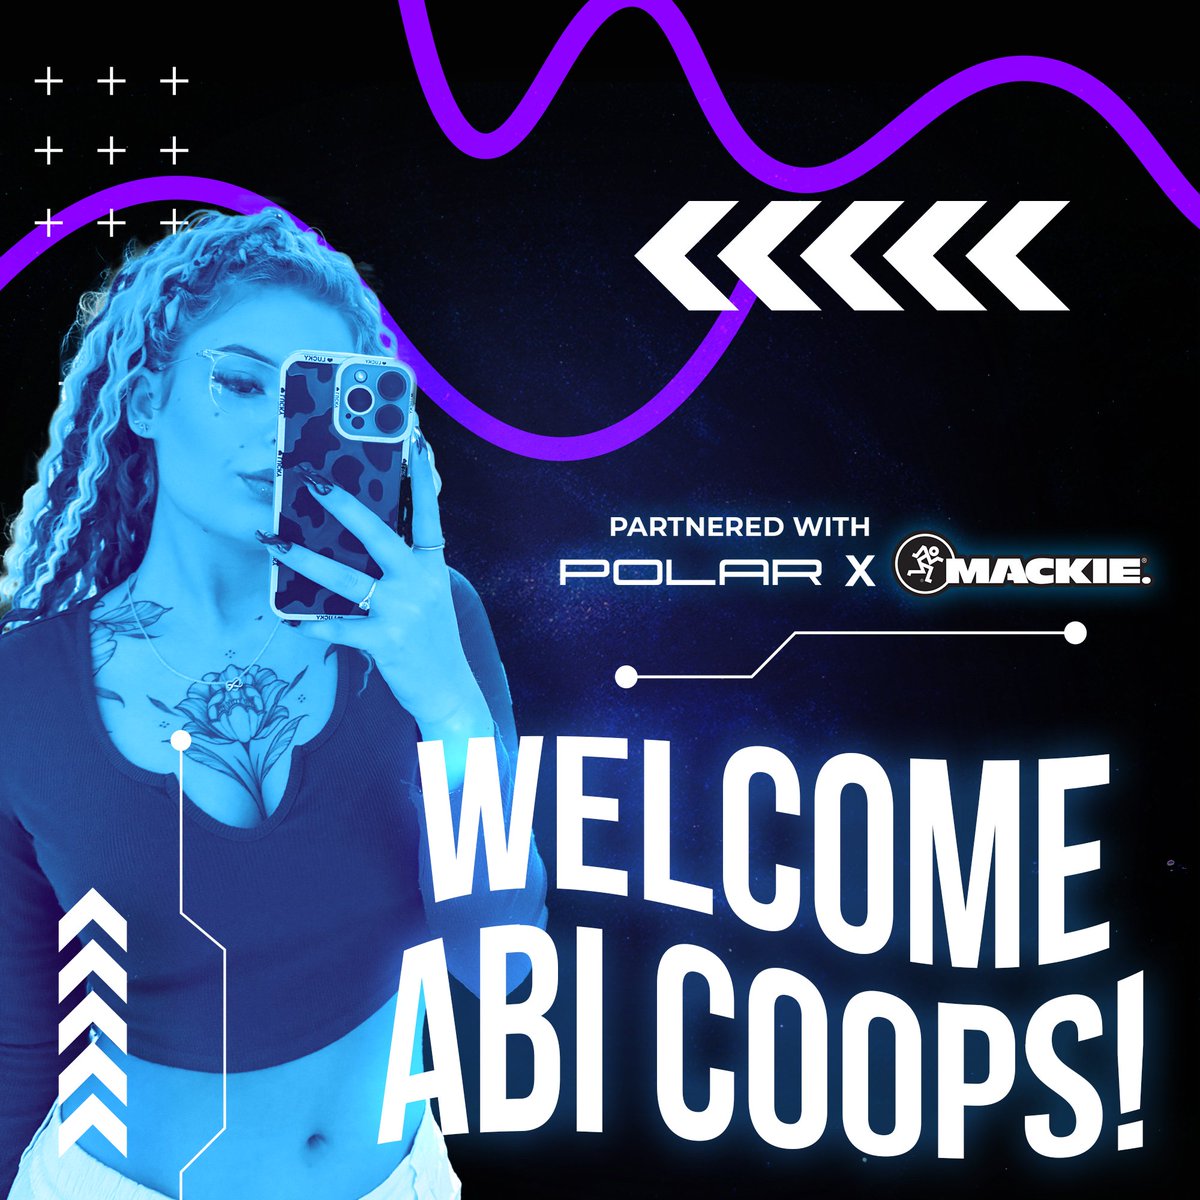 🌟Exciting Announcement Alert!🌟 

We're thrilled to unveil our latest partnership with none other than the incredibly talented content creator and streamer, @AbiCooops  🎮💫

@MackieGear & Polar are joining forces with  Abi Coops to bring you even more epic content!

Stay Tuned!